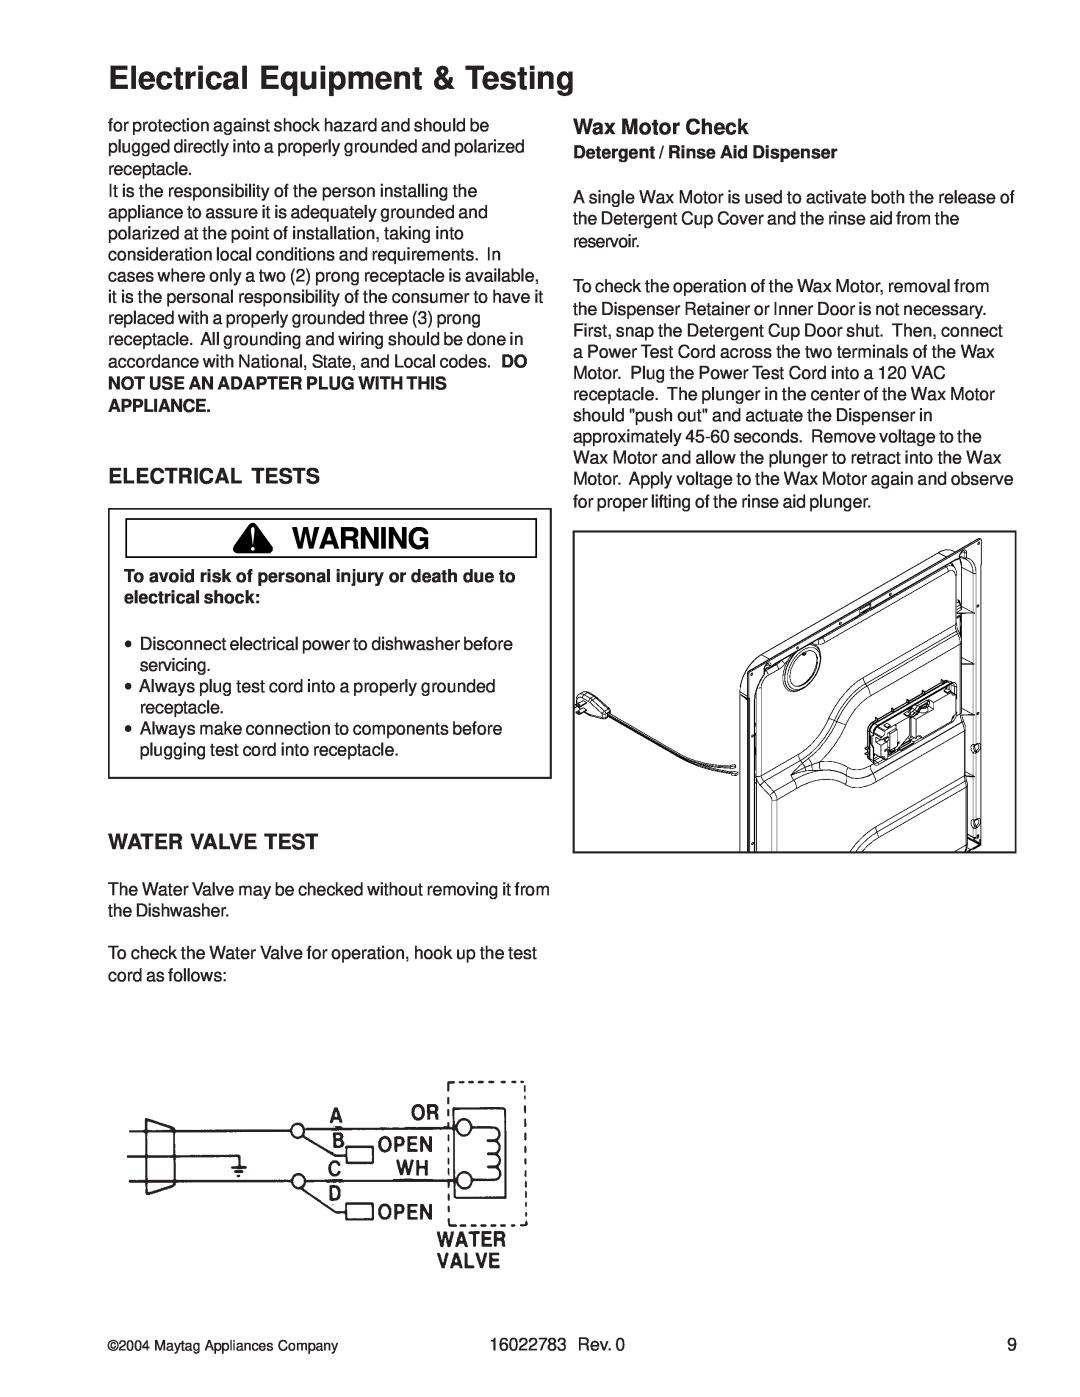 Maytag JDB2100AW manual Electrical Tests, Wax Motor Check, Water Valve Test, Not Use An Adapter Plug With This Appliance 